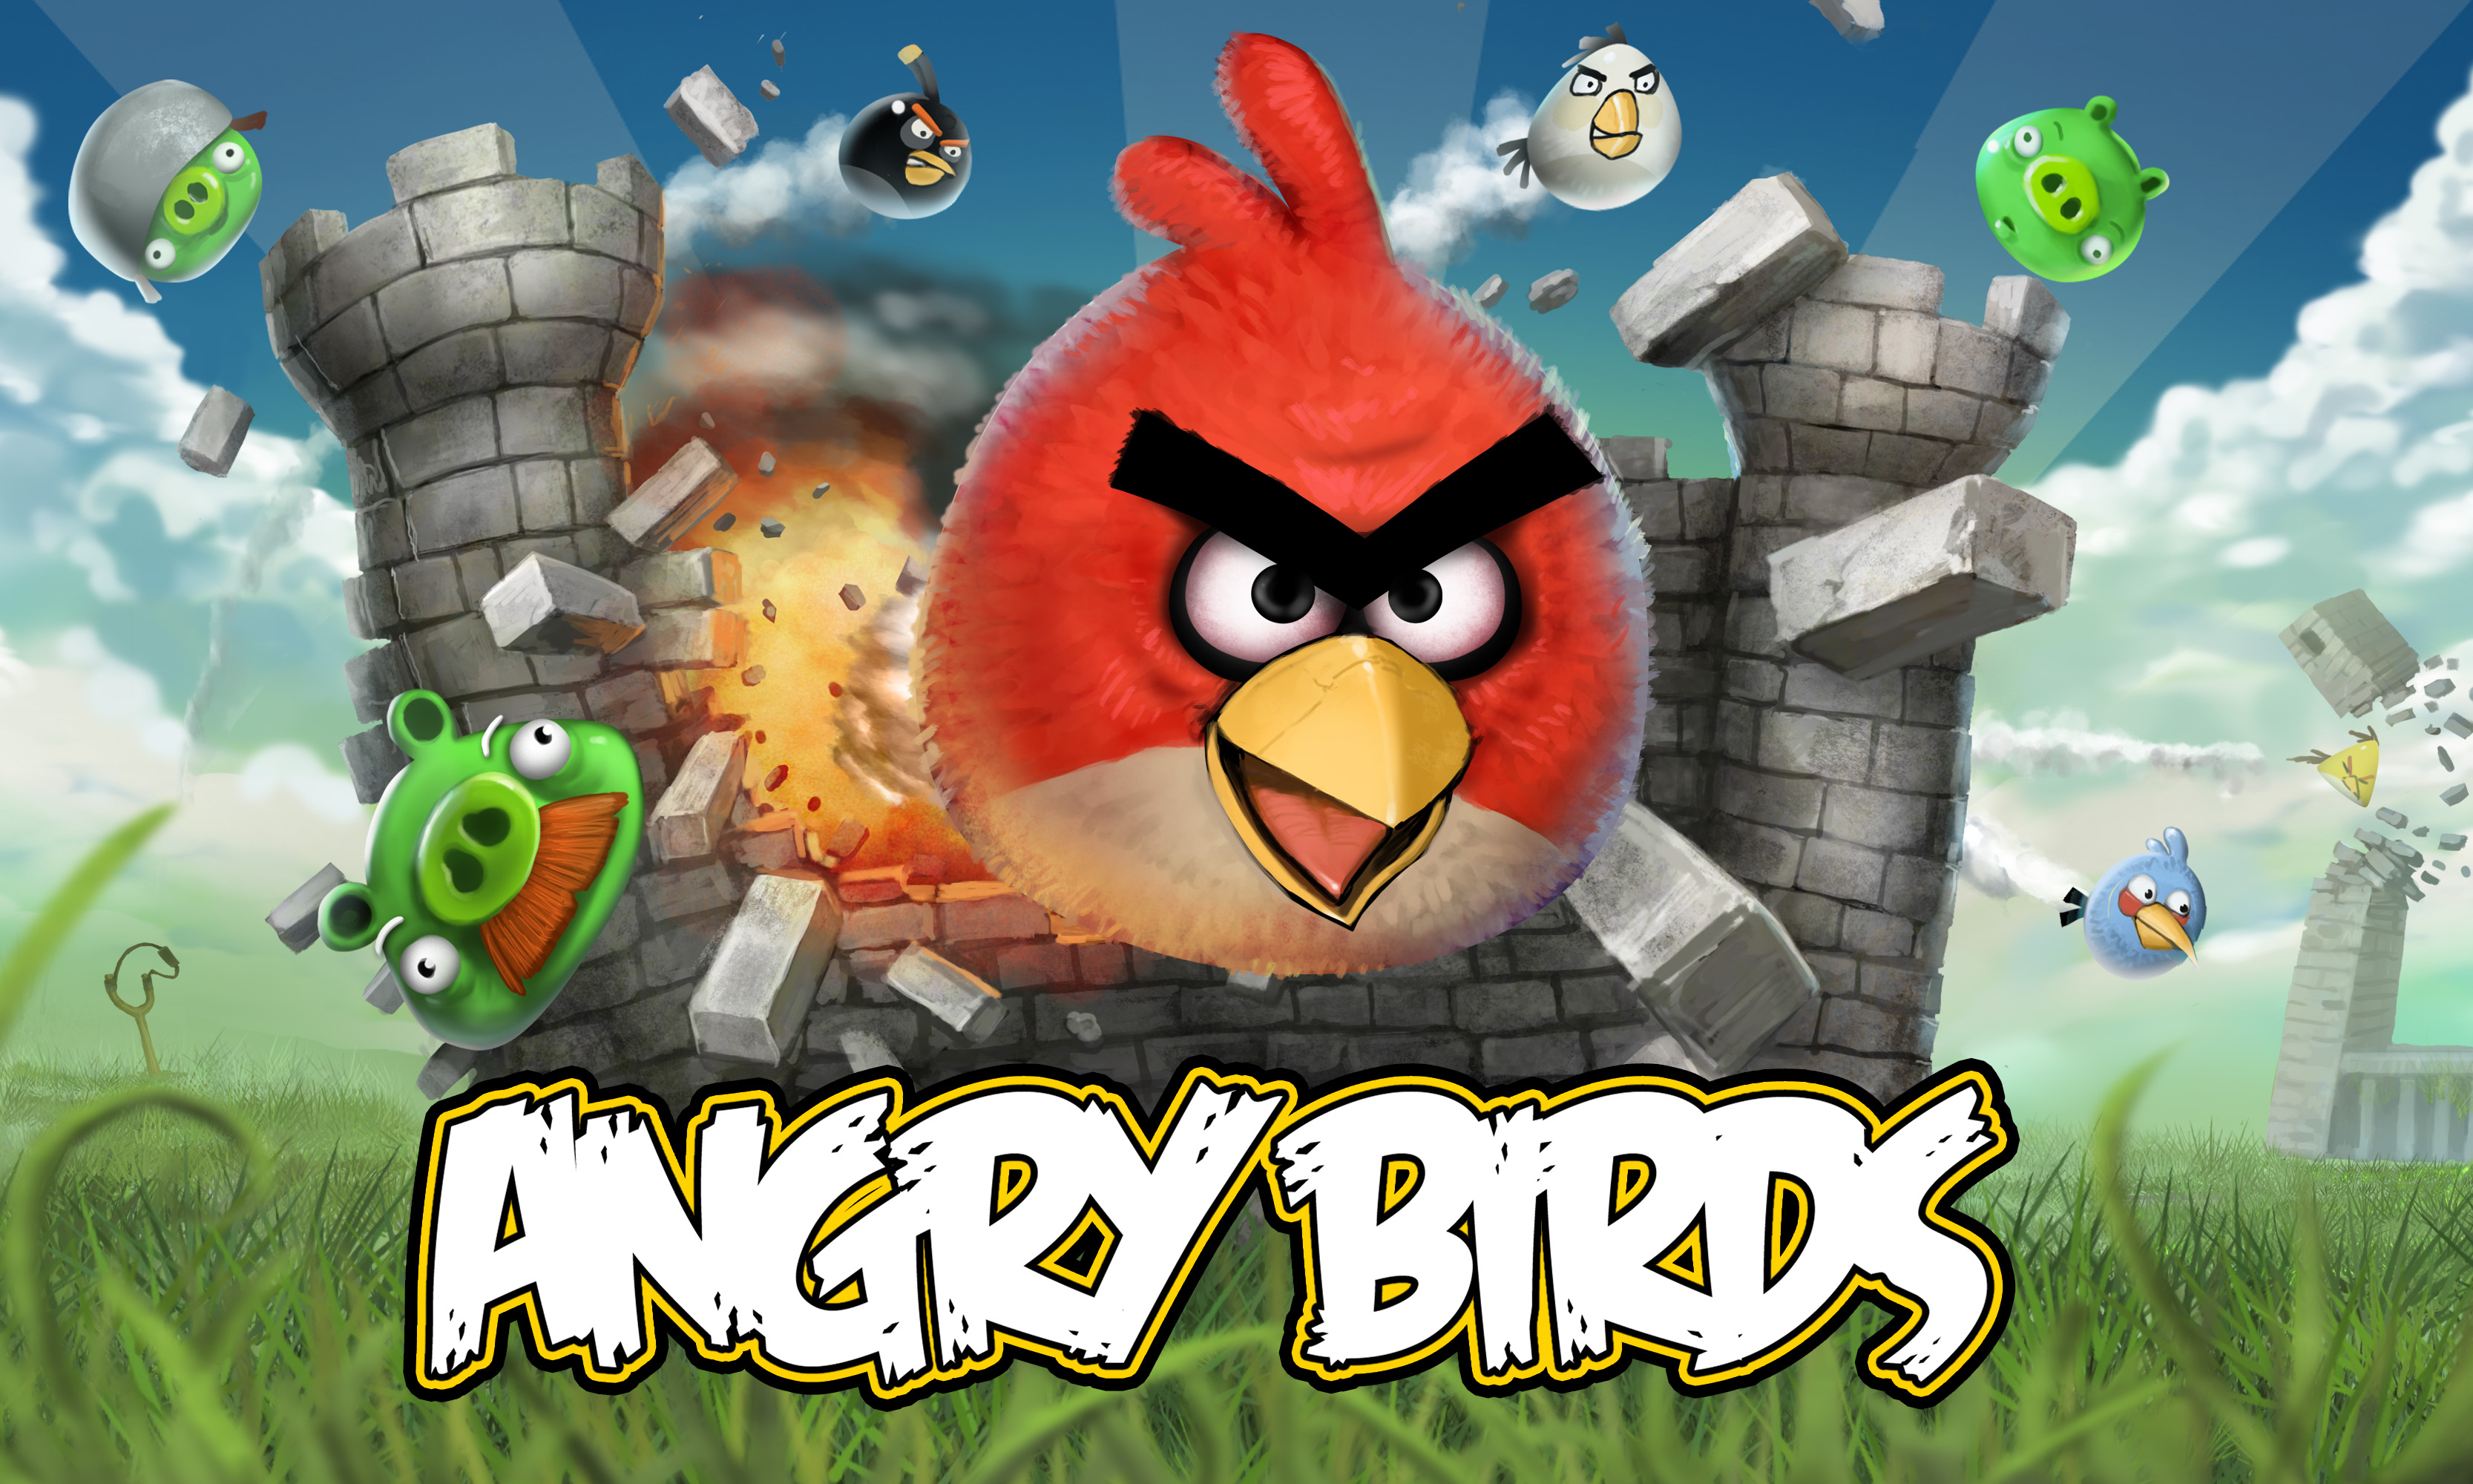 Angry Birds Wallpaper PCTechNotes PC Tips Tricks and Tweaks